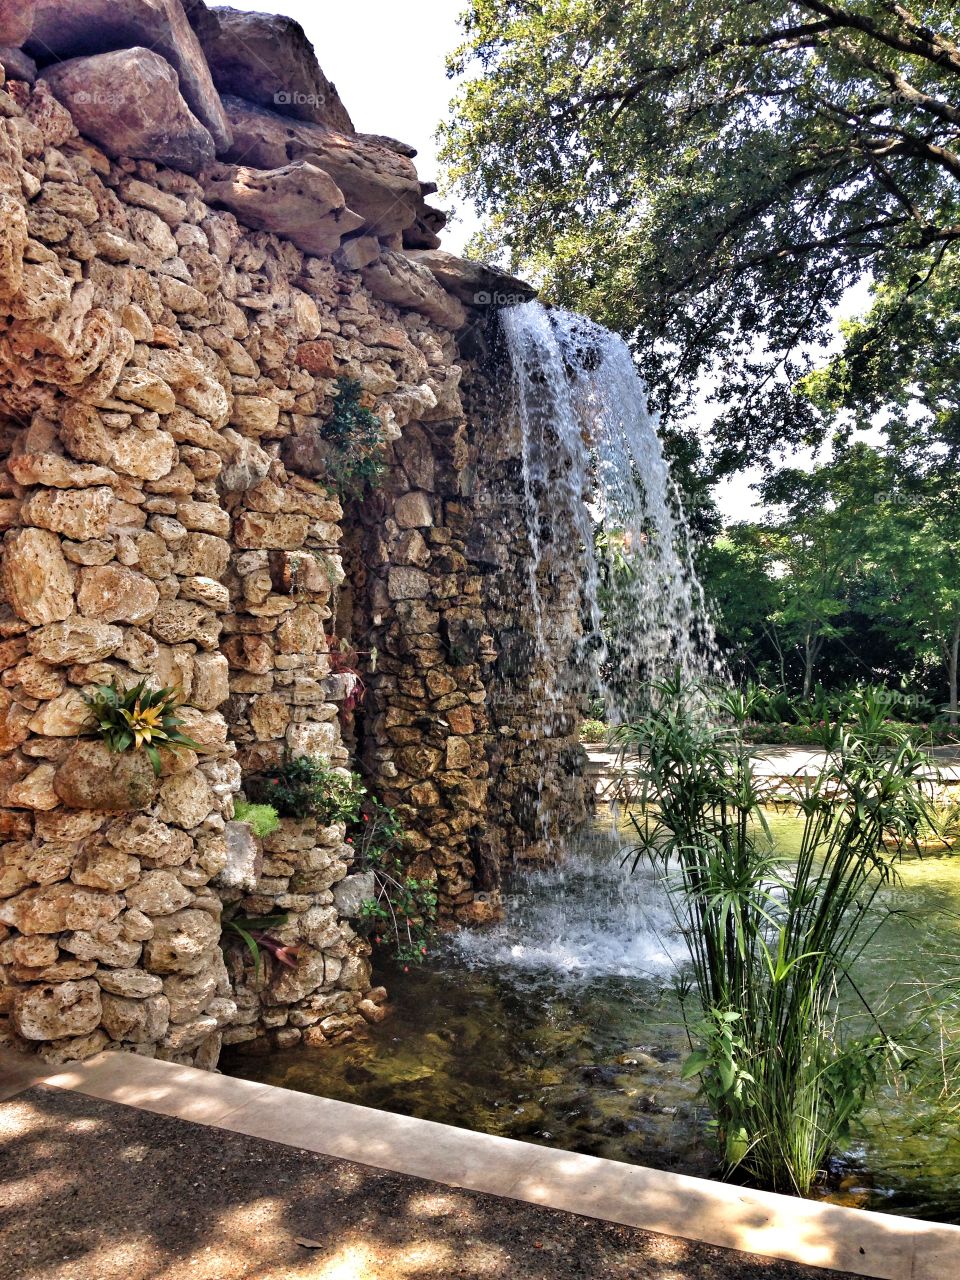 Falling for the view. Waterfall at an outdoor garden exhibit 